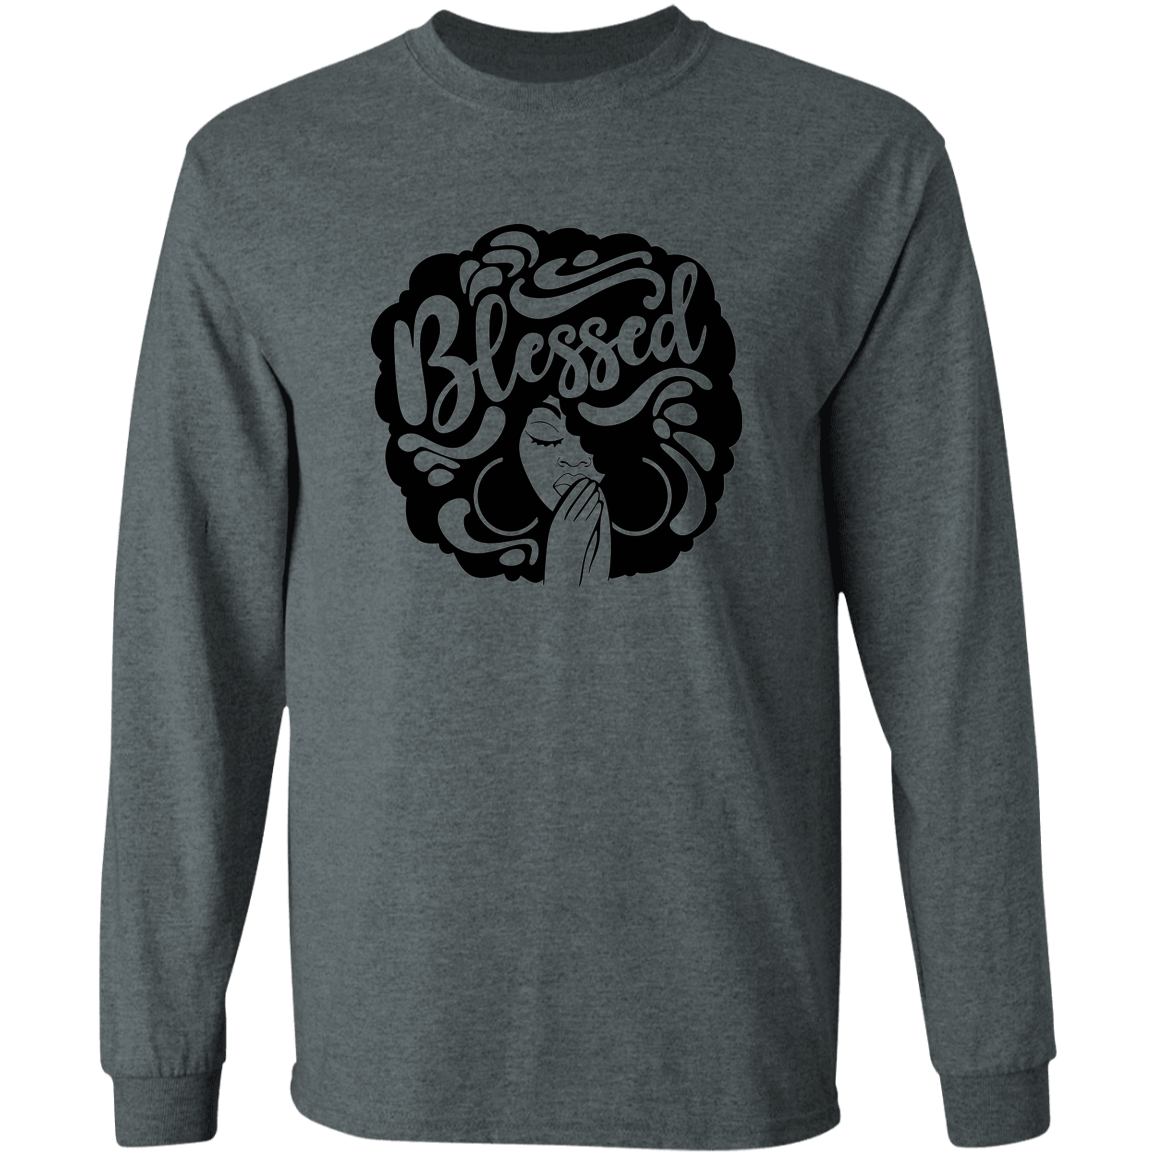 Blessed Ultra Cotton T-Shirt